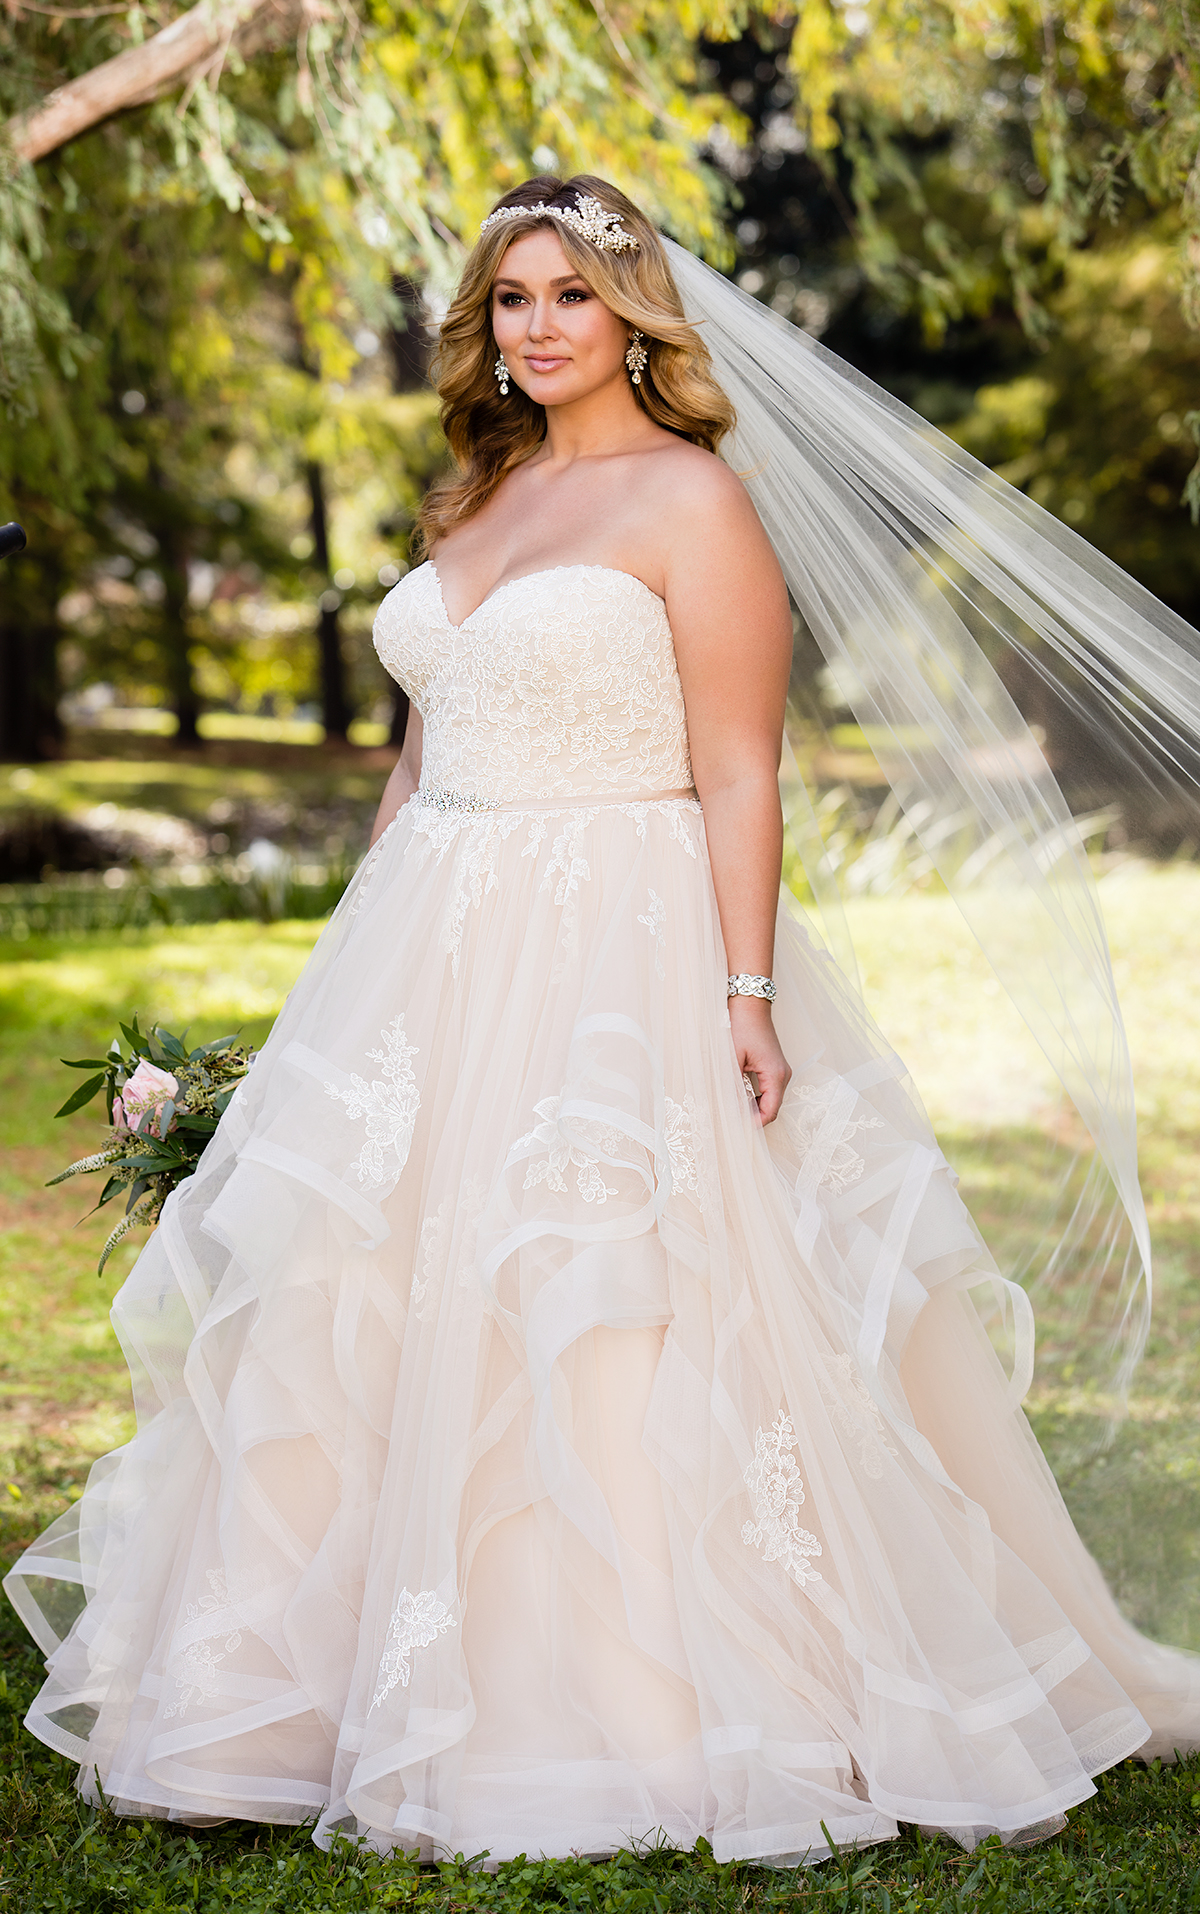 5 Essential Tips to Plus Size Wedding Gown Shopping. Desktop Image